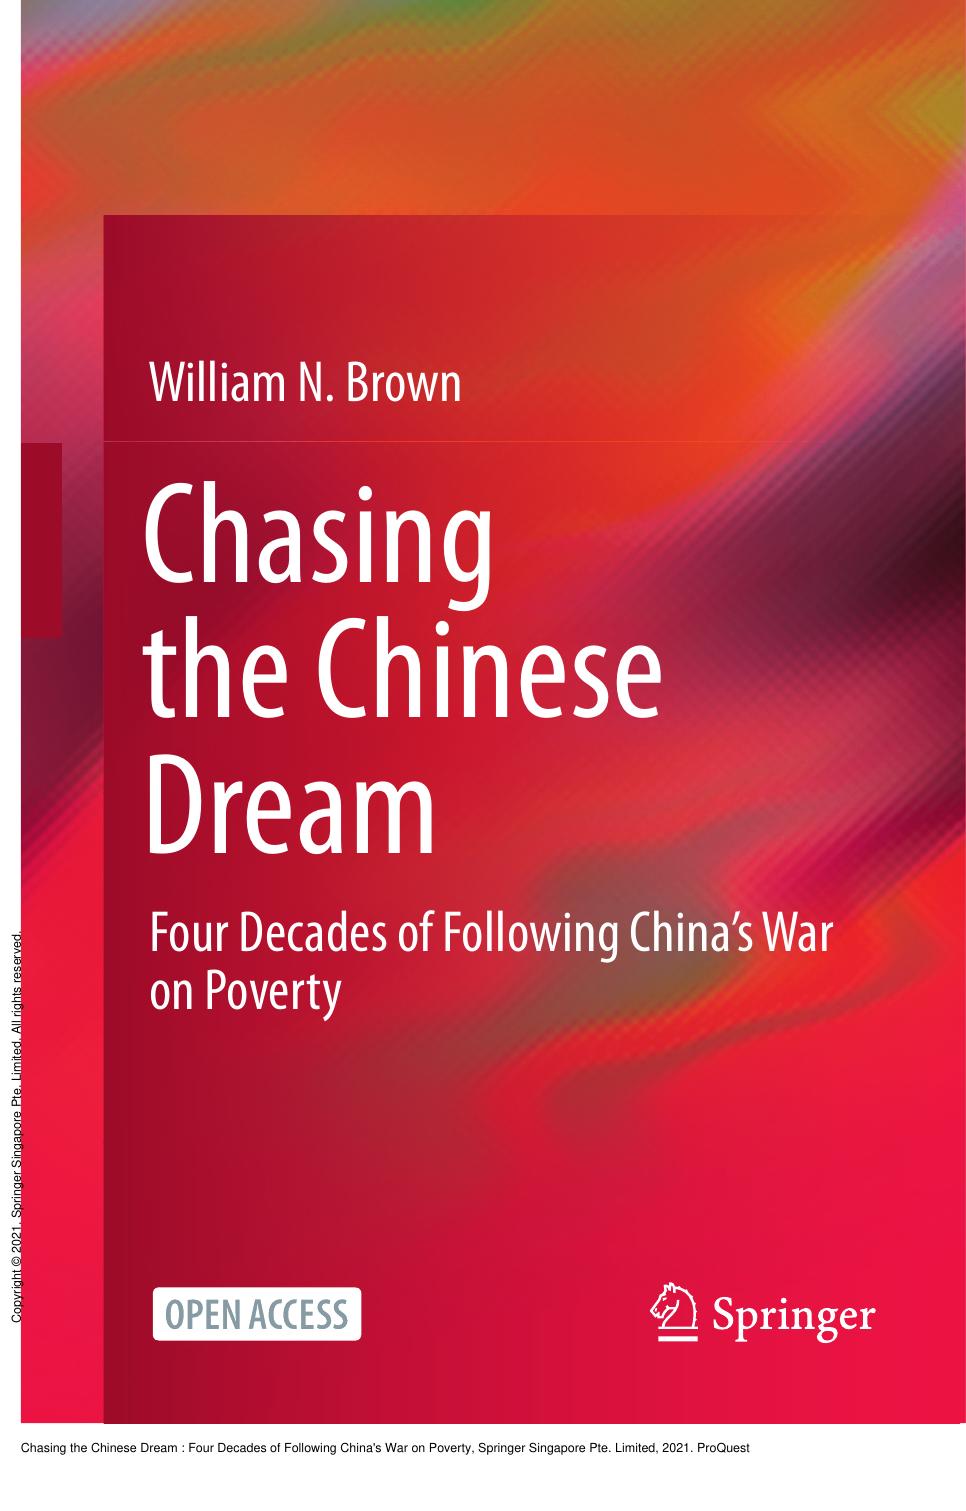 Chasing the Chinese Dream : Four Decades of Following China's War on Poverty by William N. Brown